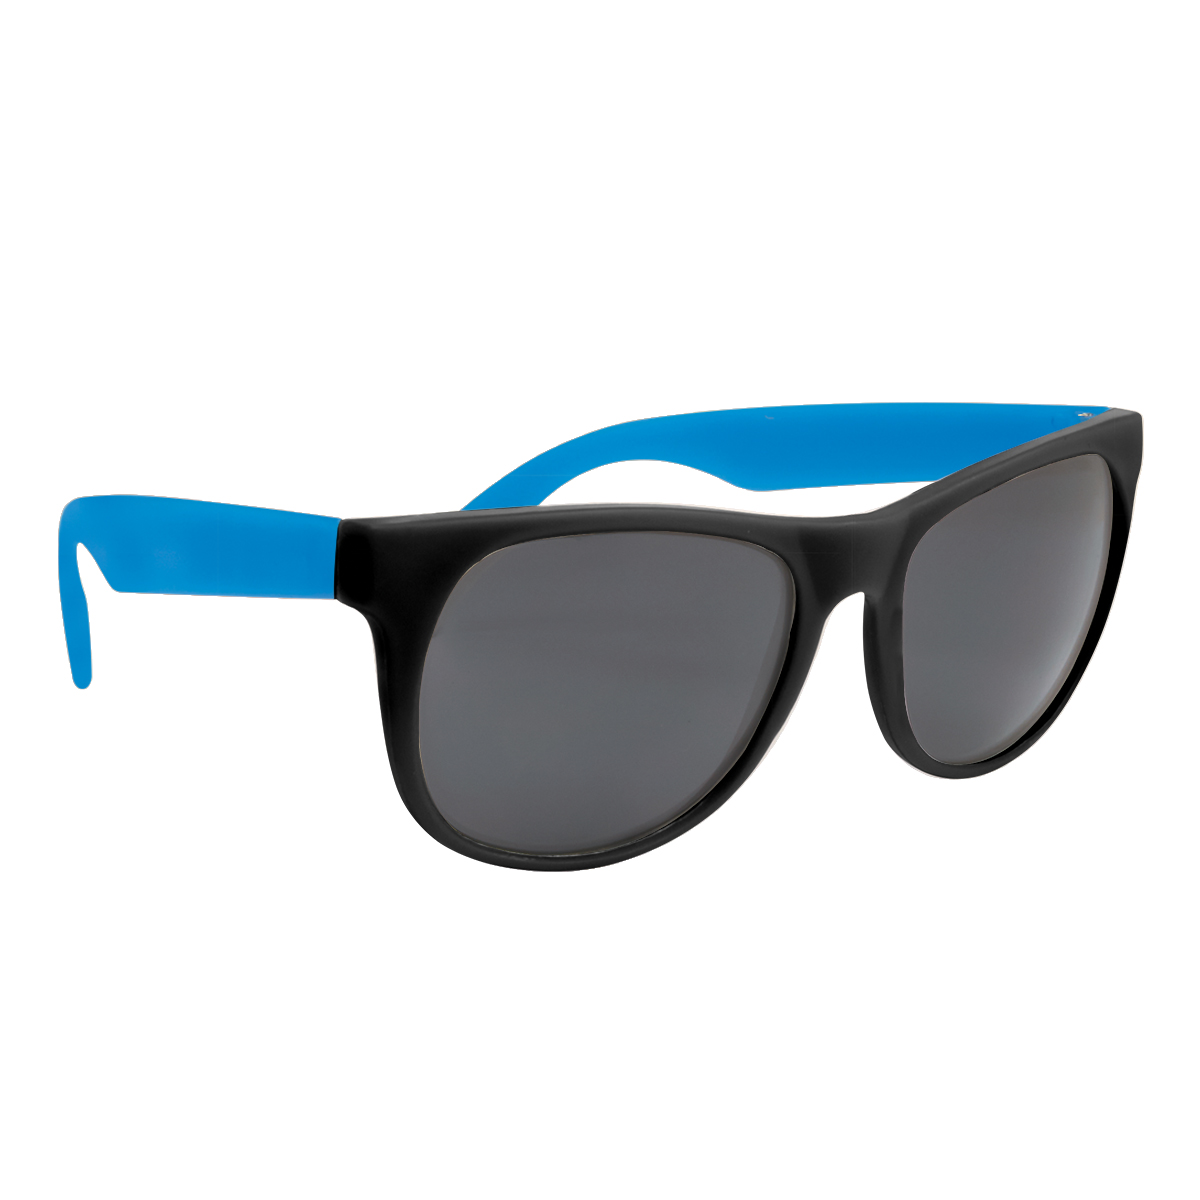 Black Frame with Blue Temples Rubberized Sunglasses